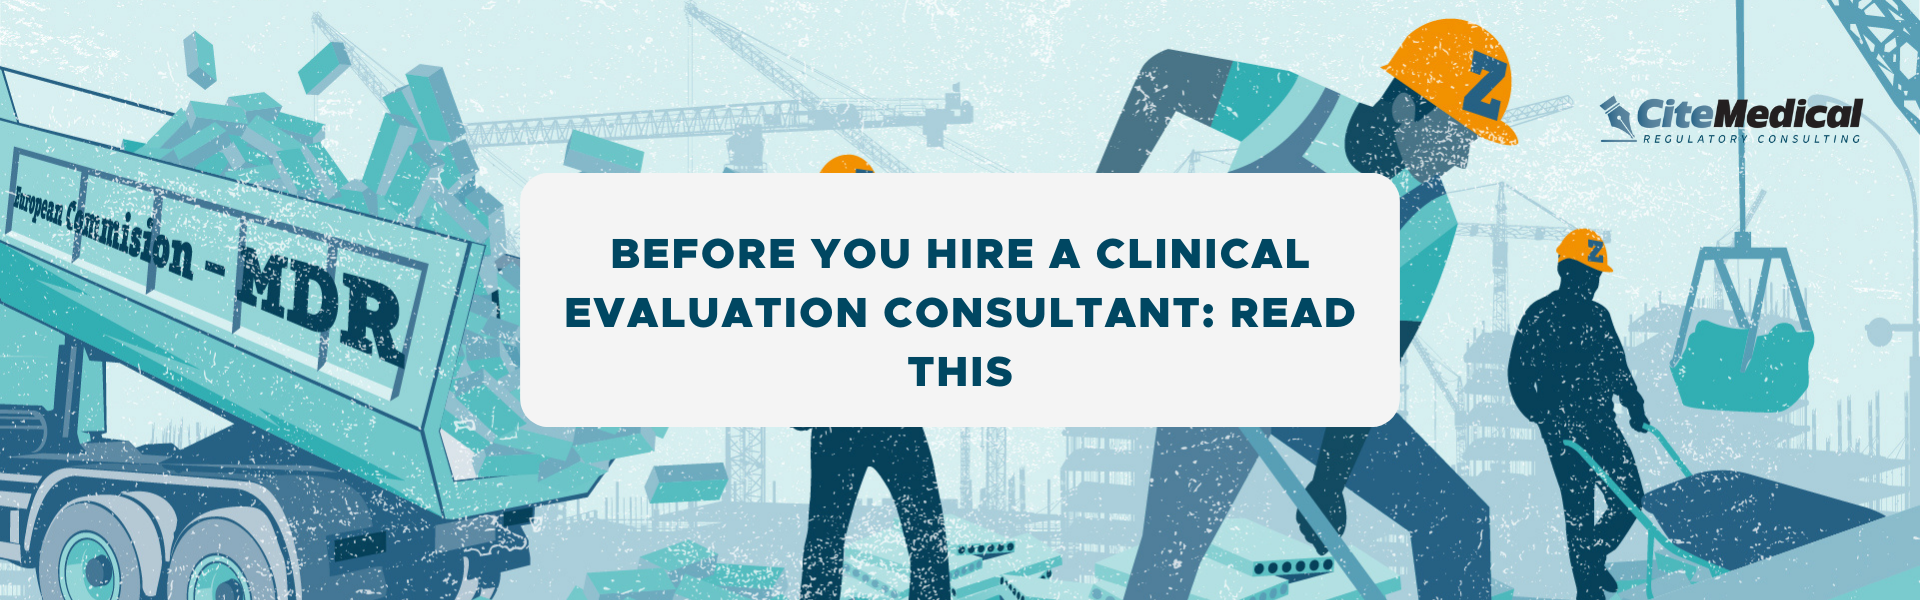 Hire a Clinical Evaluation Consultant